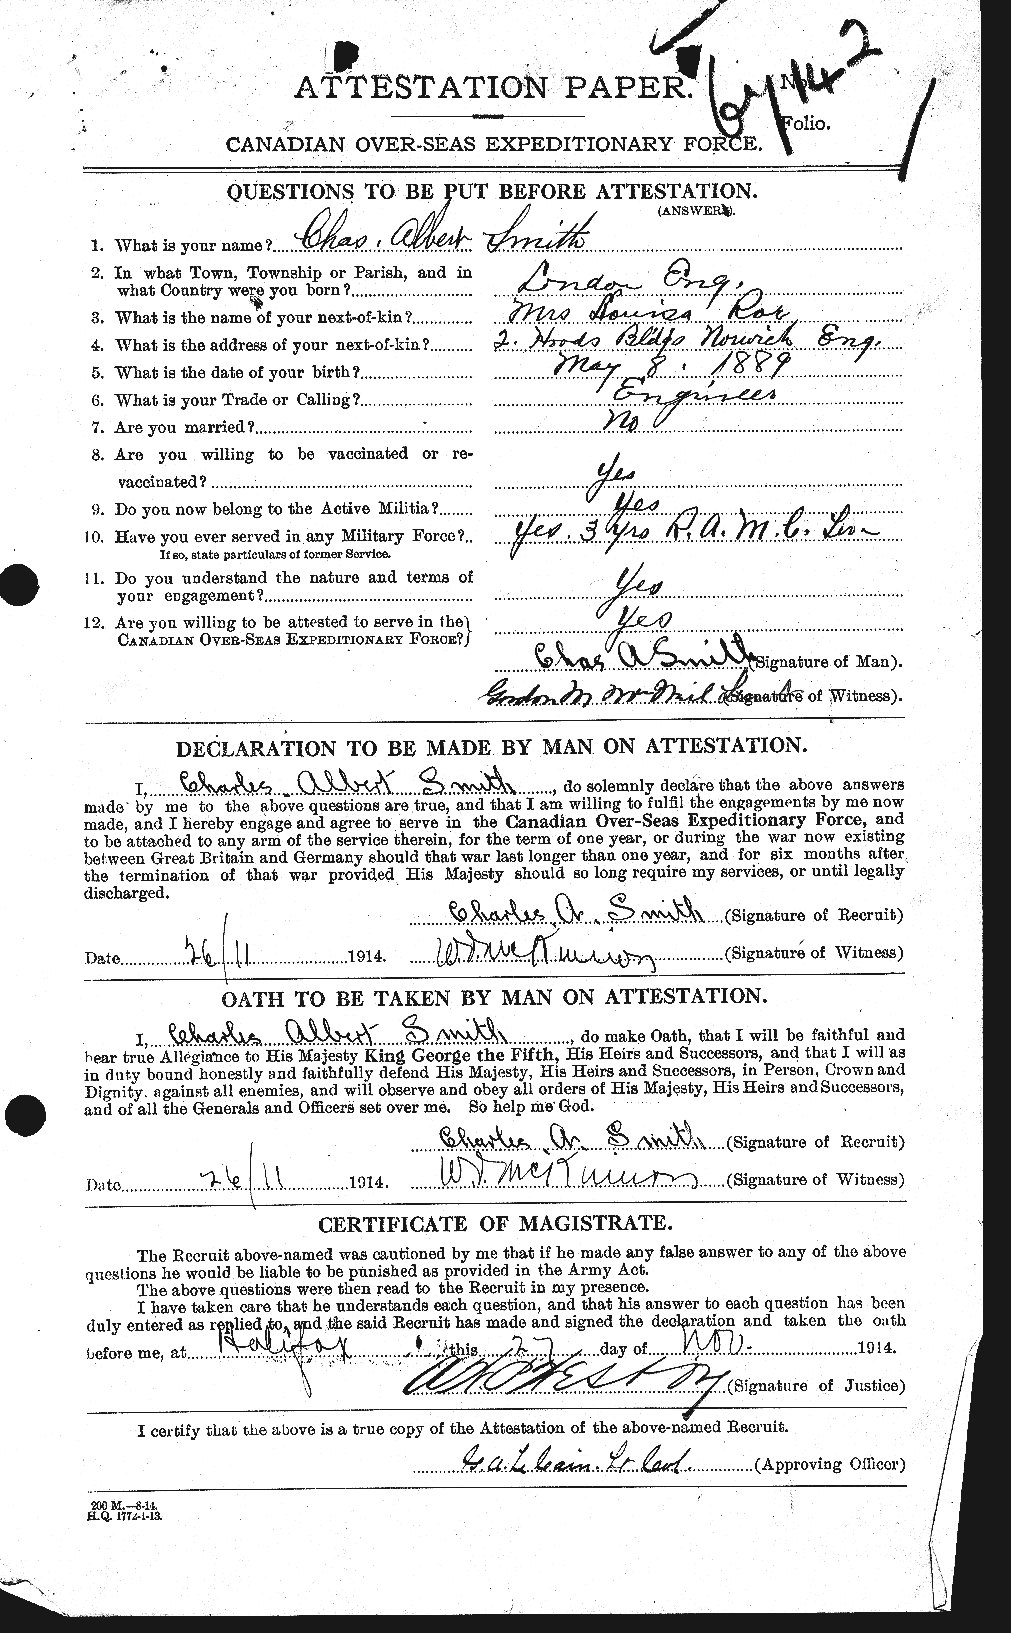 Personnel Records of the First World War - CEF 100104a